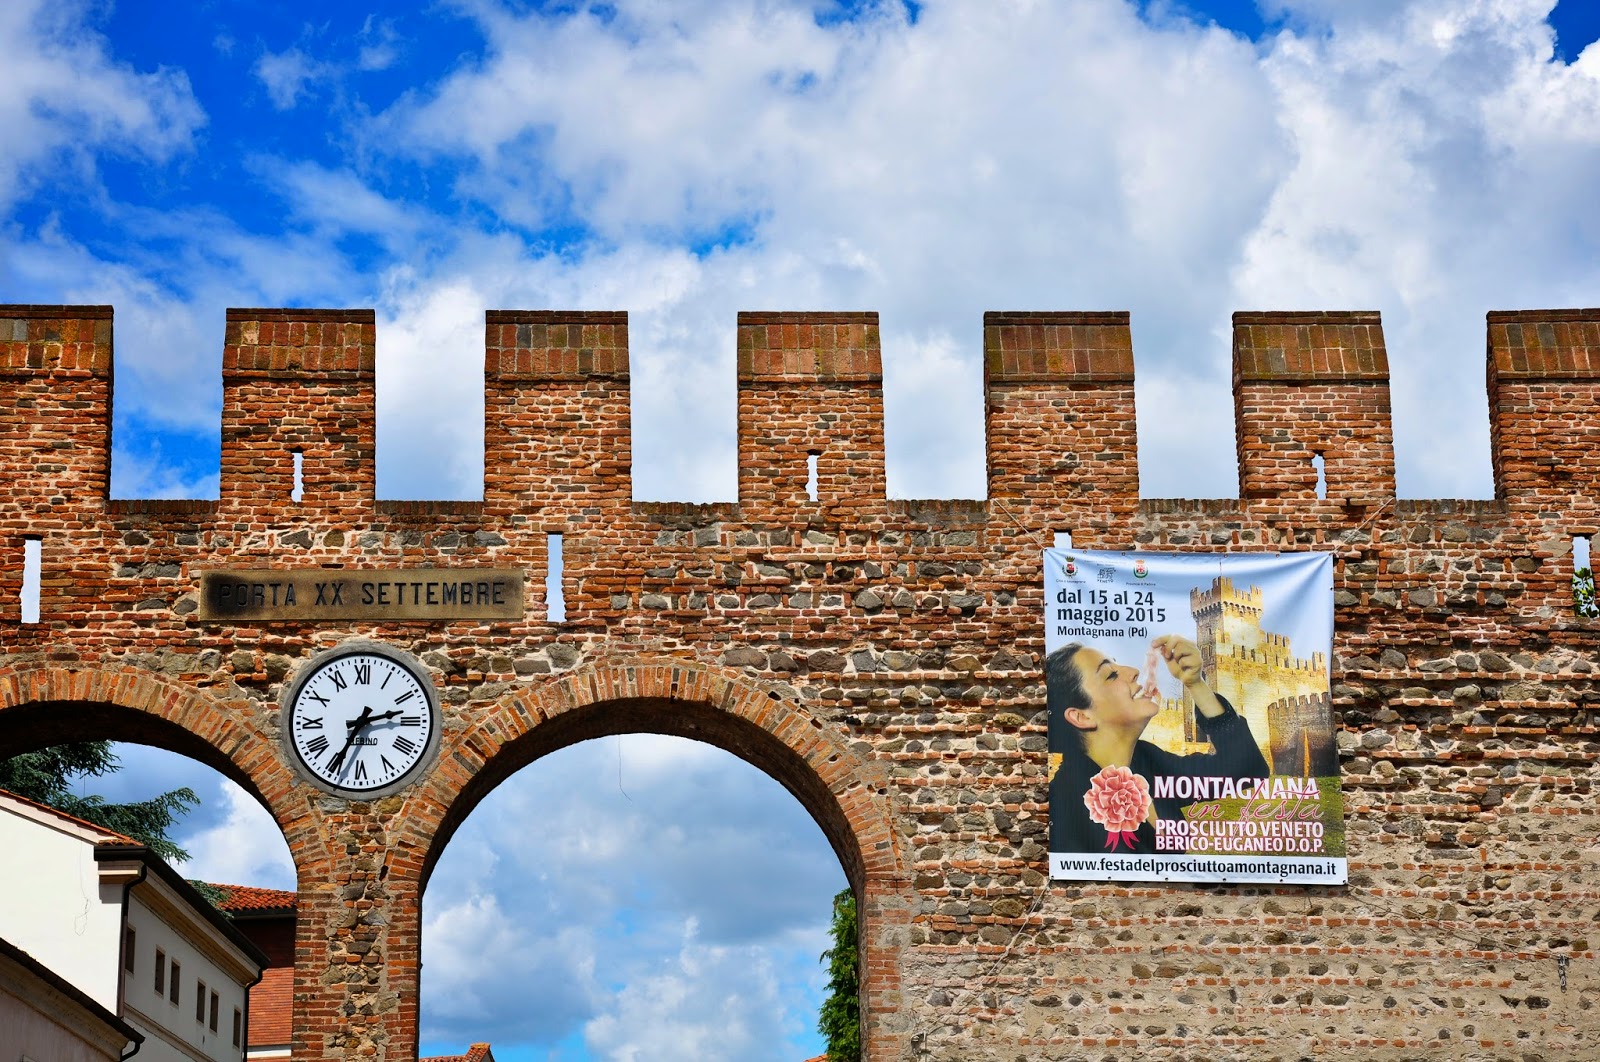 The poster for the Prosciutto festival on the defensive wall of Montagnana, Veneto, Italy